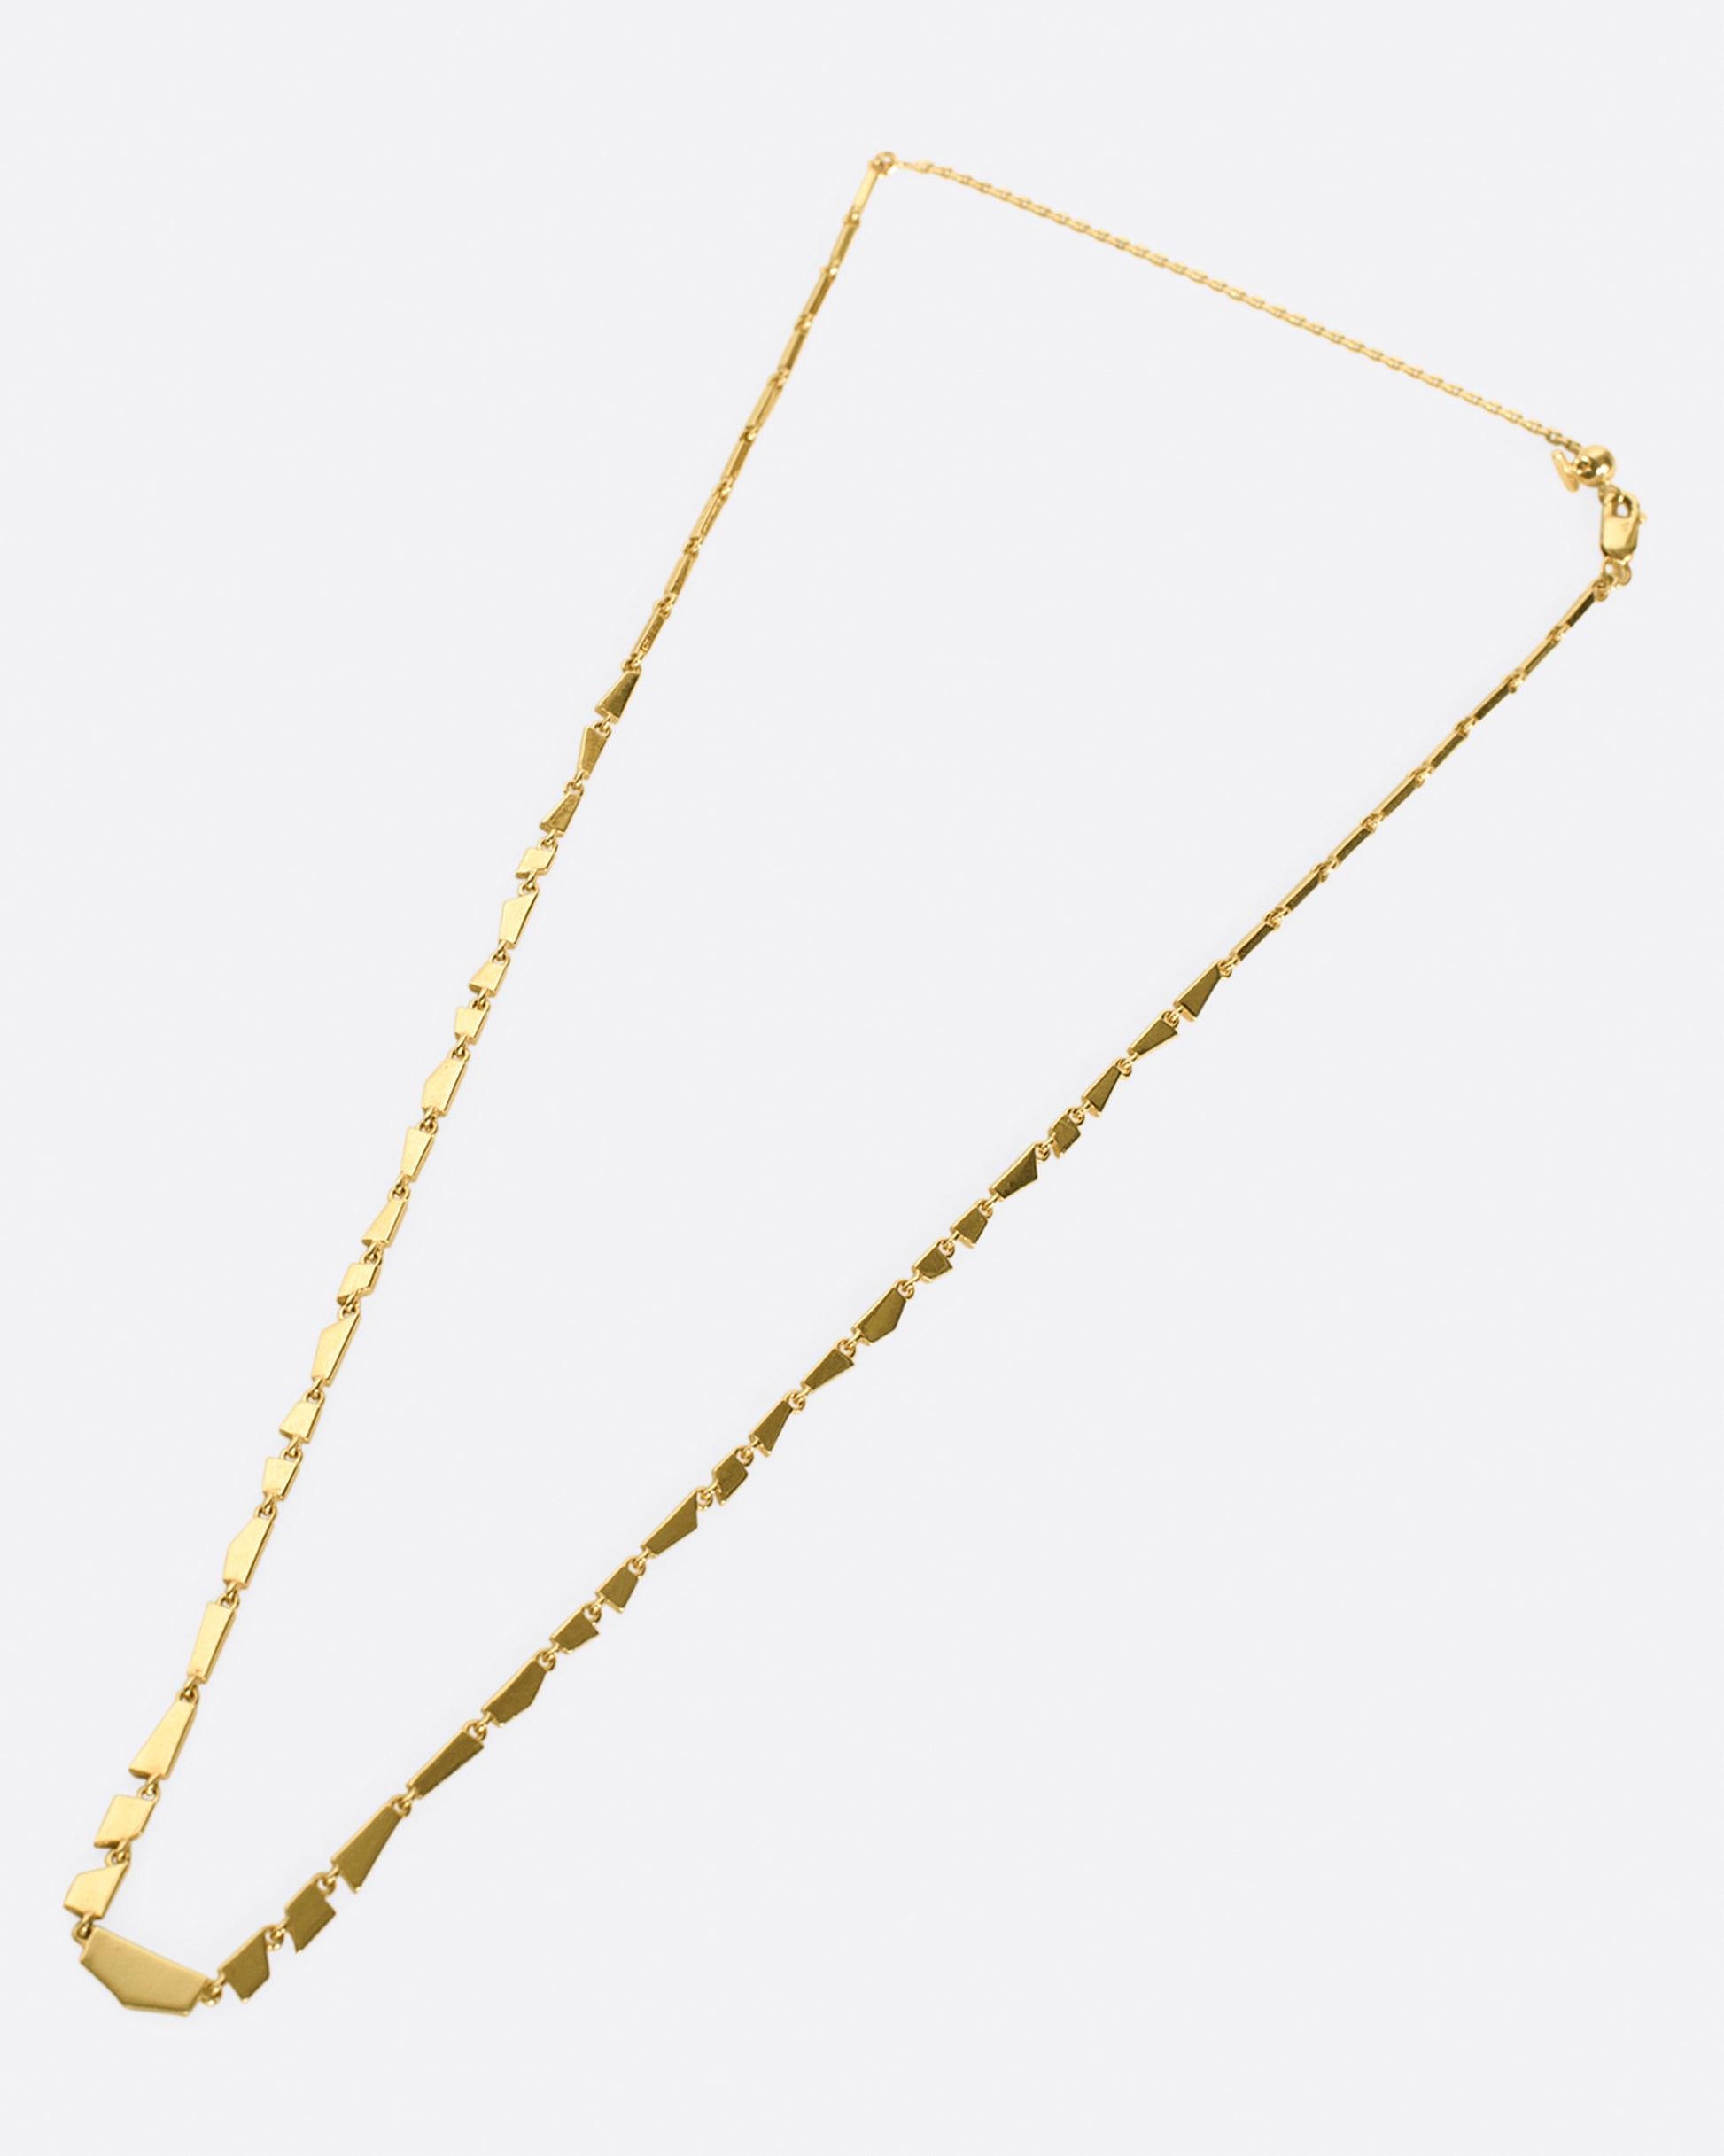 A chain necklace comprised of gold geometric segments.